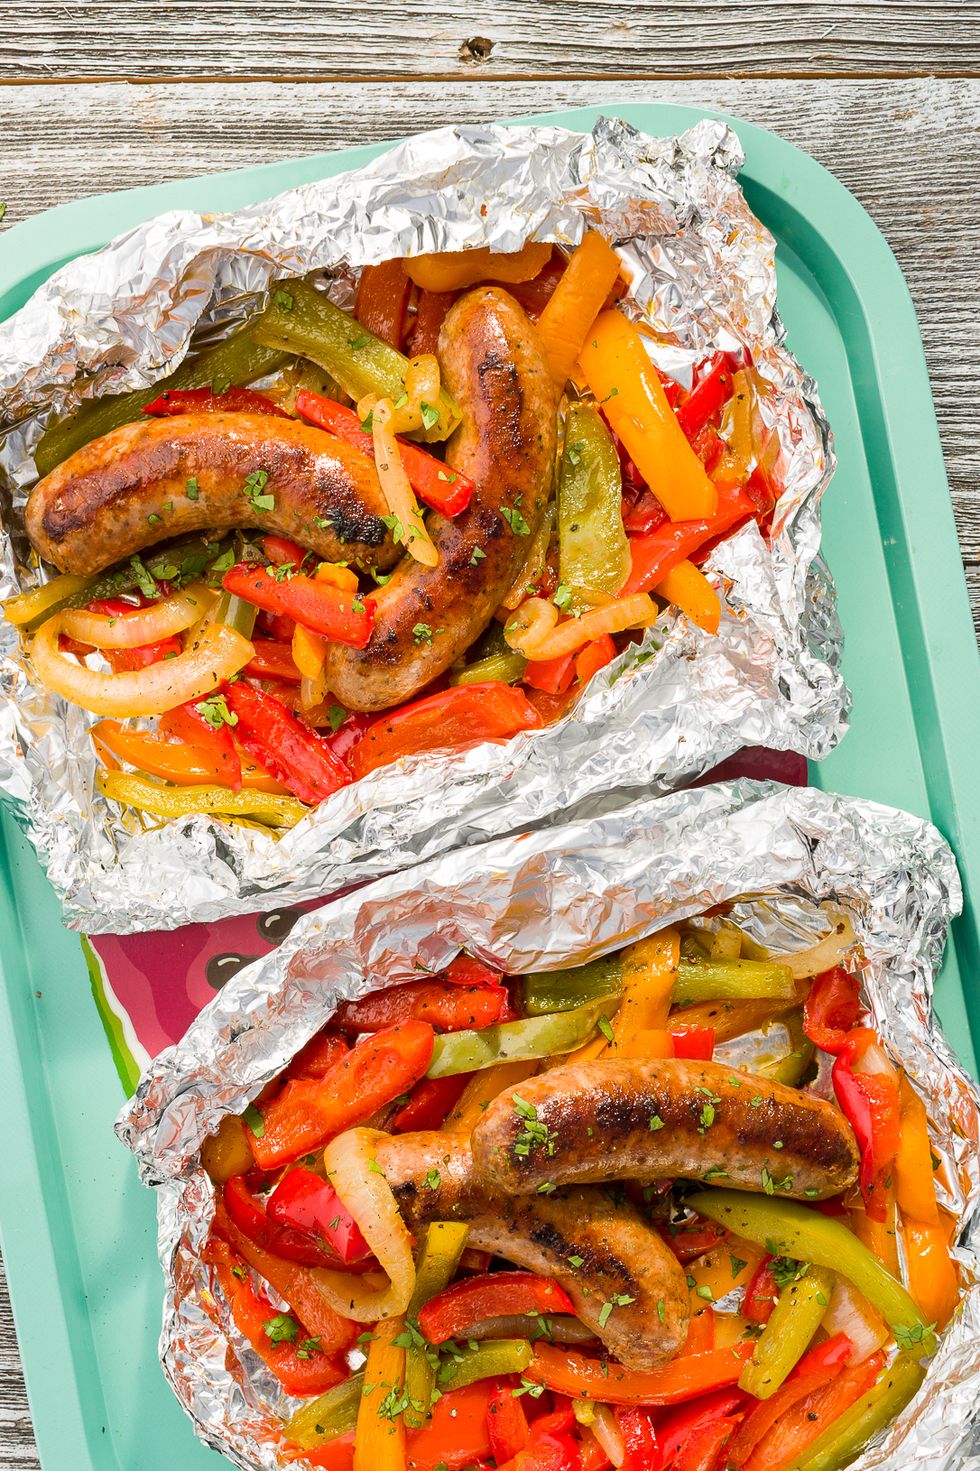 https://hips.hearstapps.com/del.h-cdn.co/assets/16/23/1465232421-delish-sausage-peppers-foil-pack-1-2.jpg?crop=0.815xw:0.815xh;0.0782xw,0.0988xh&resize=980:*